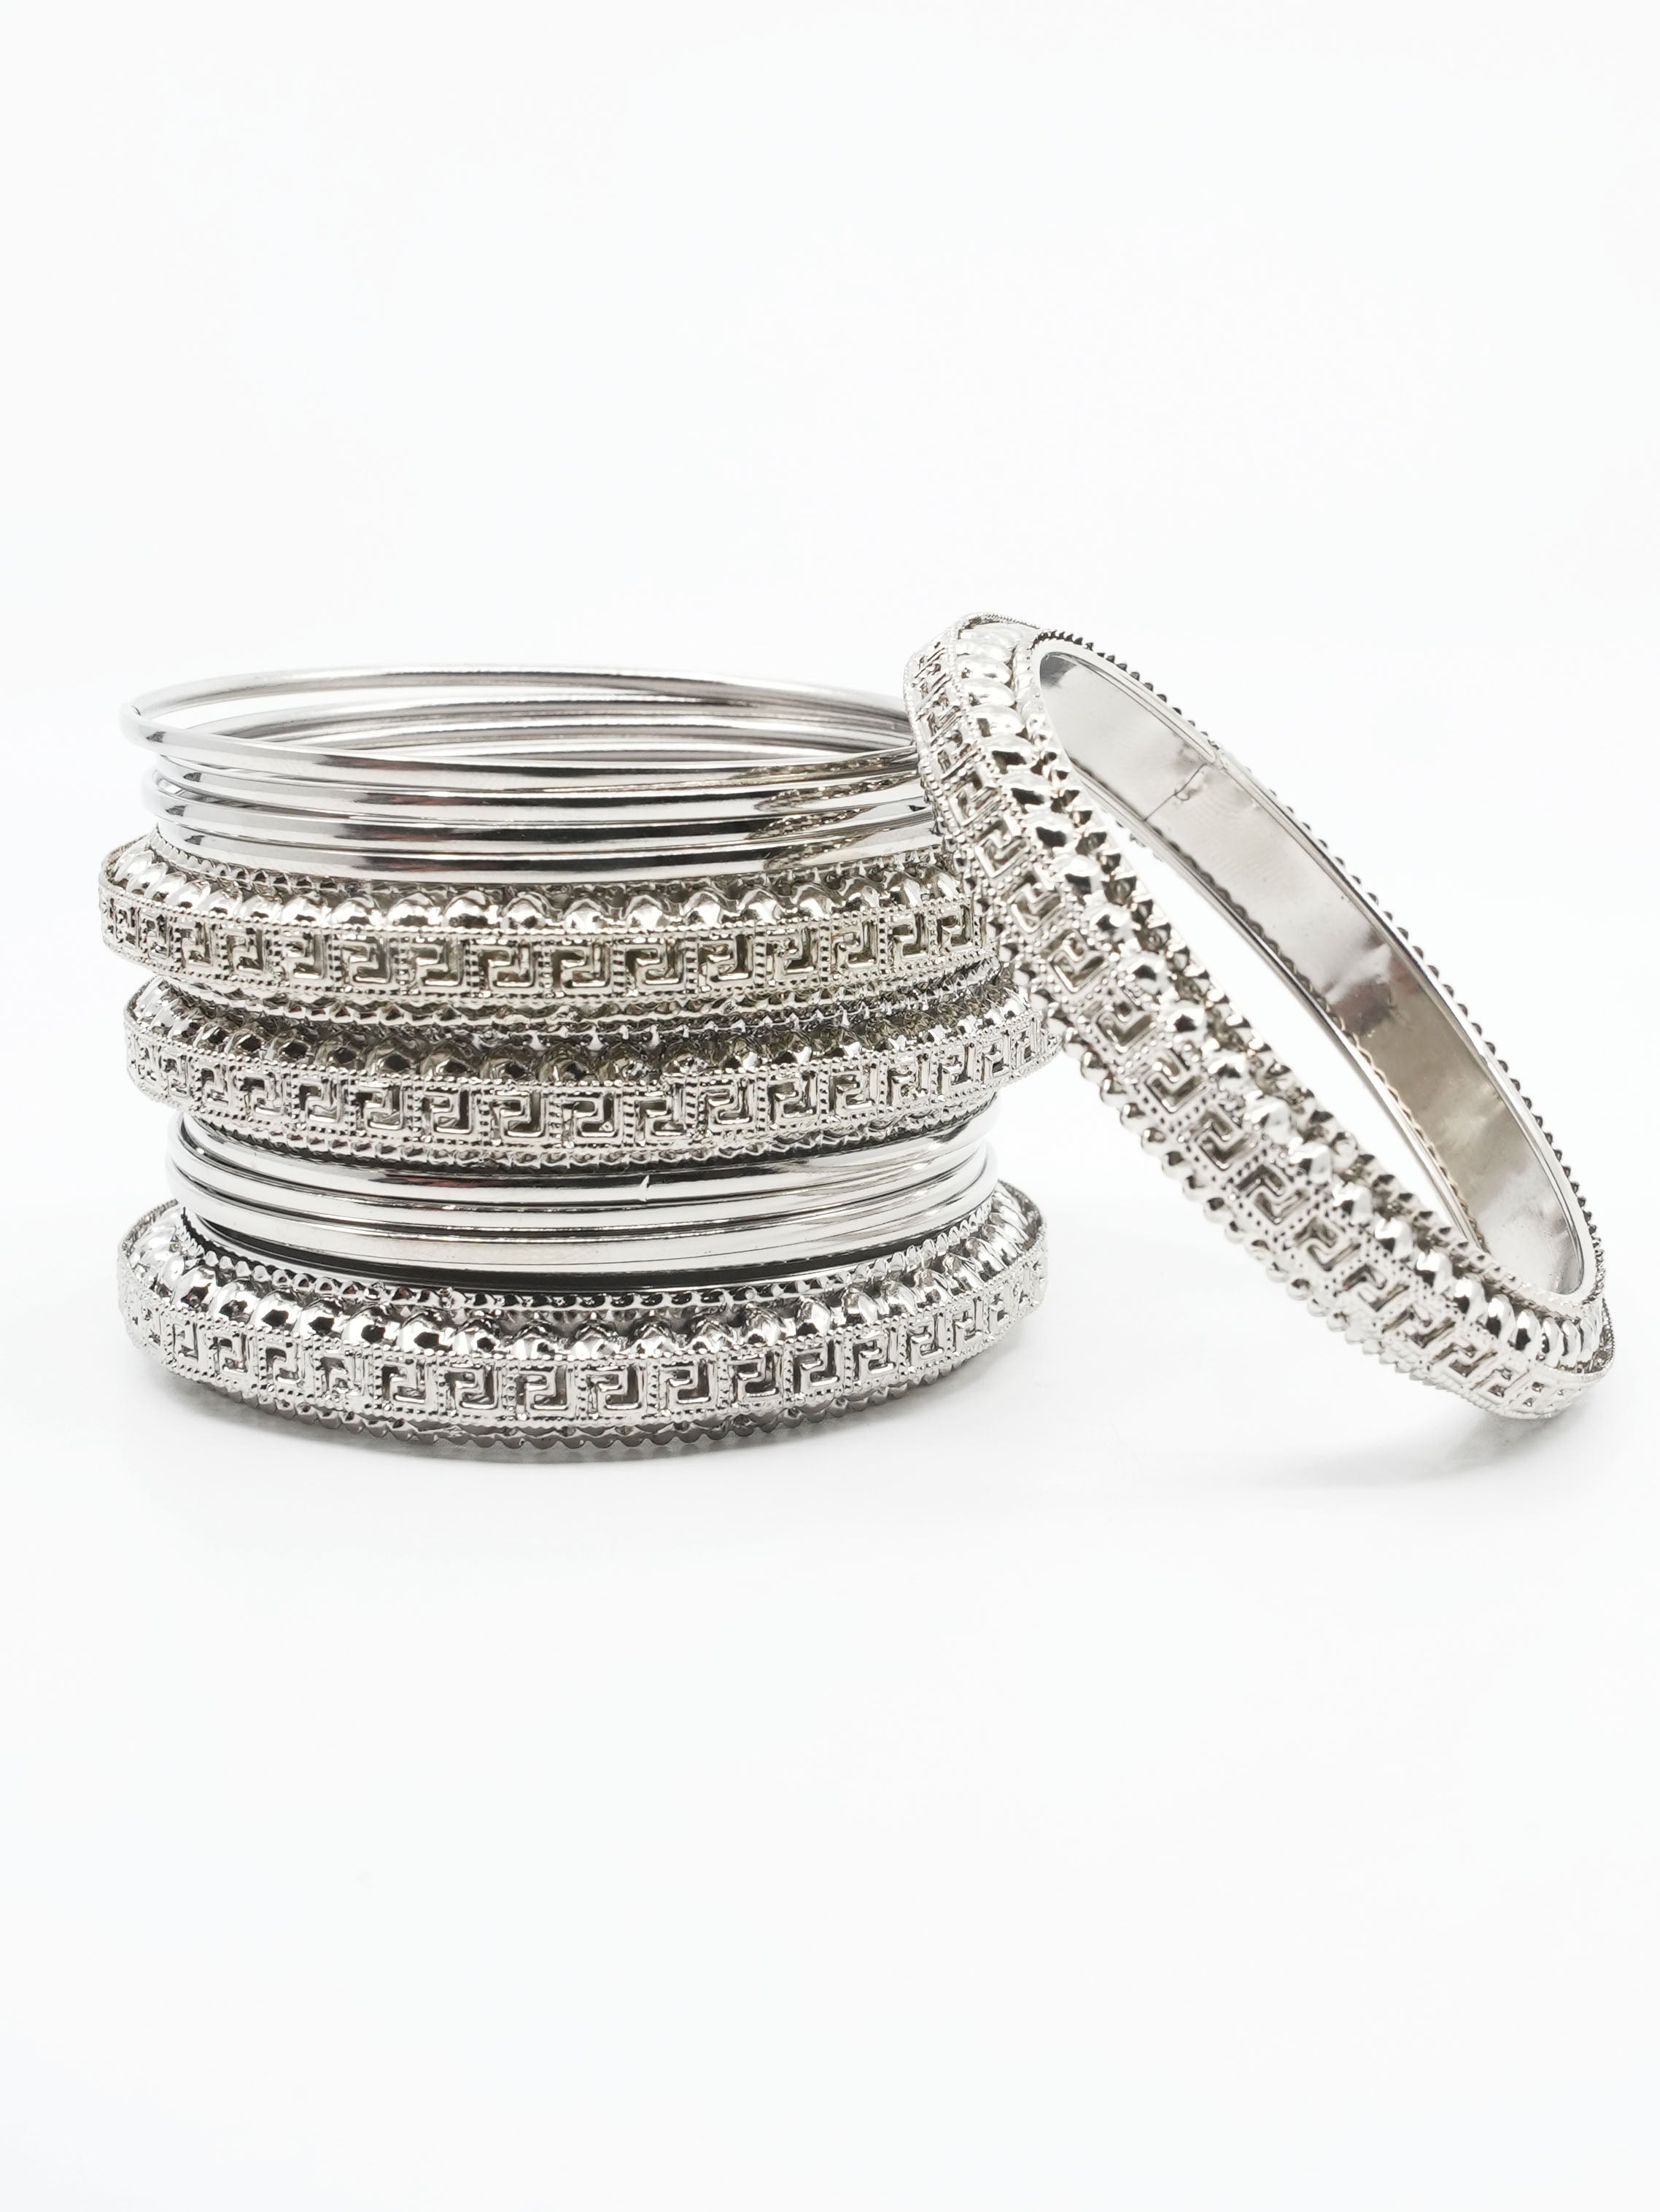 Fancy Silver Plated Bangles Set of 12 bangles 11422K